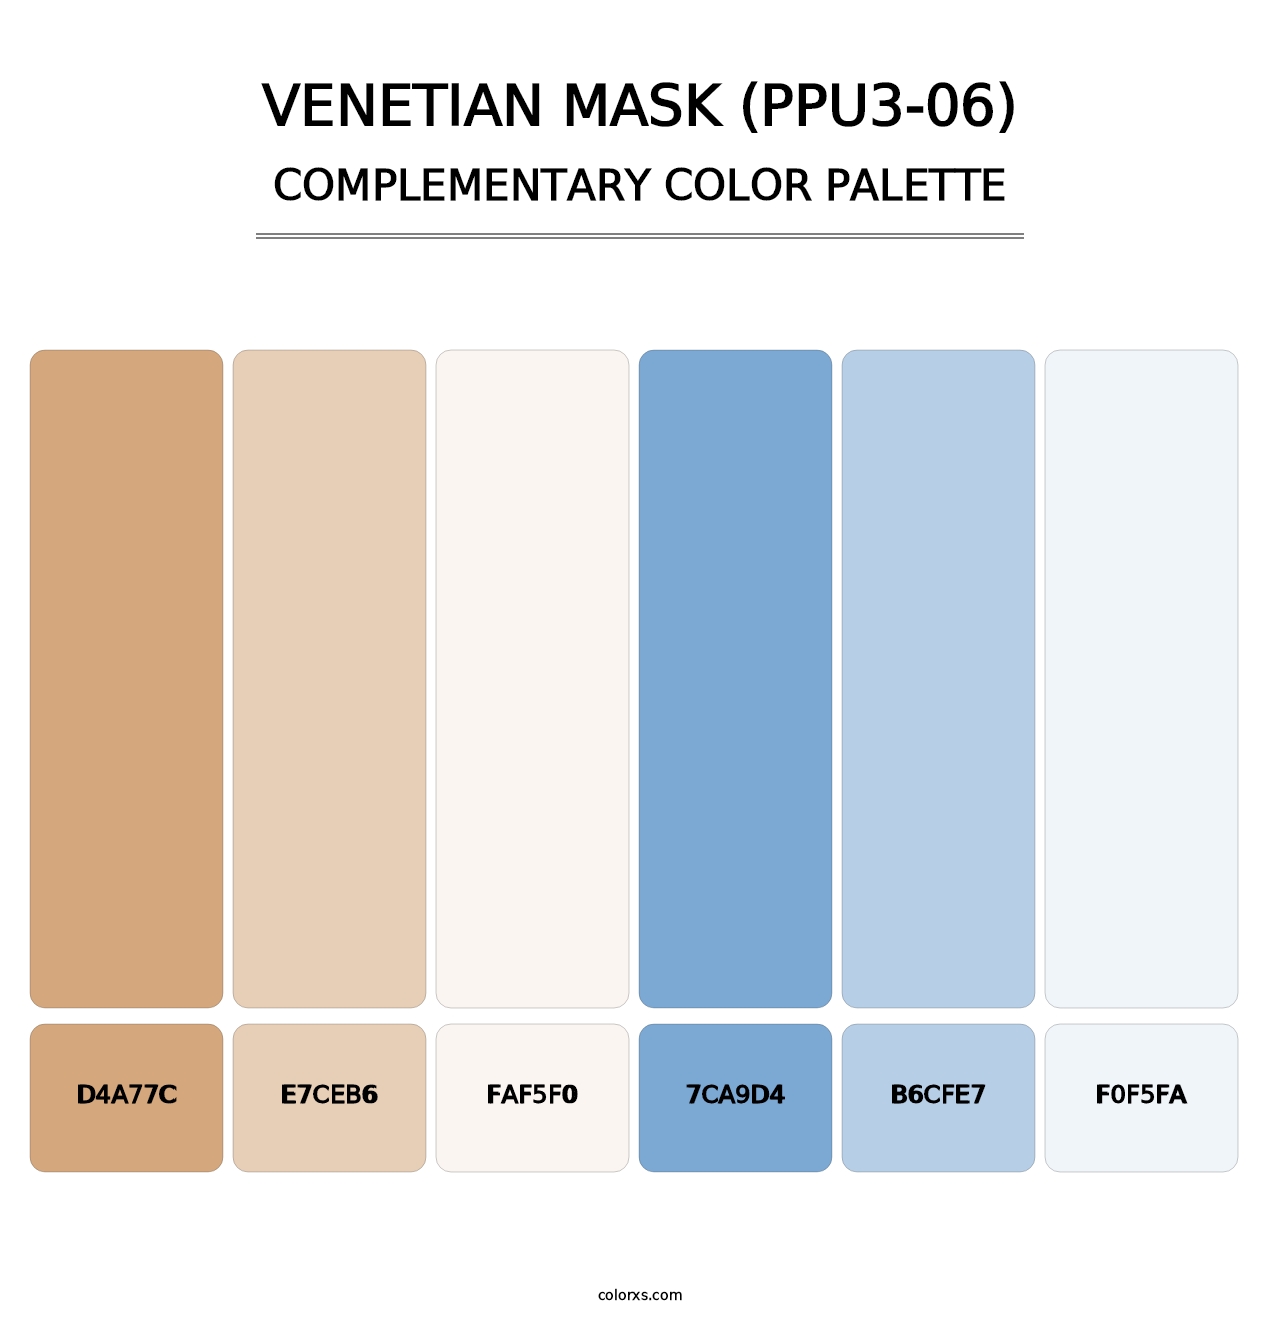 Venetian Mask (PPU3-06) - Complementary Color Palette